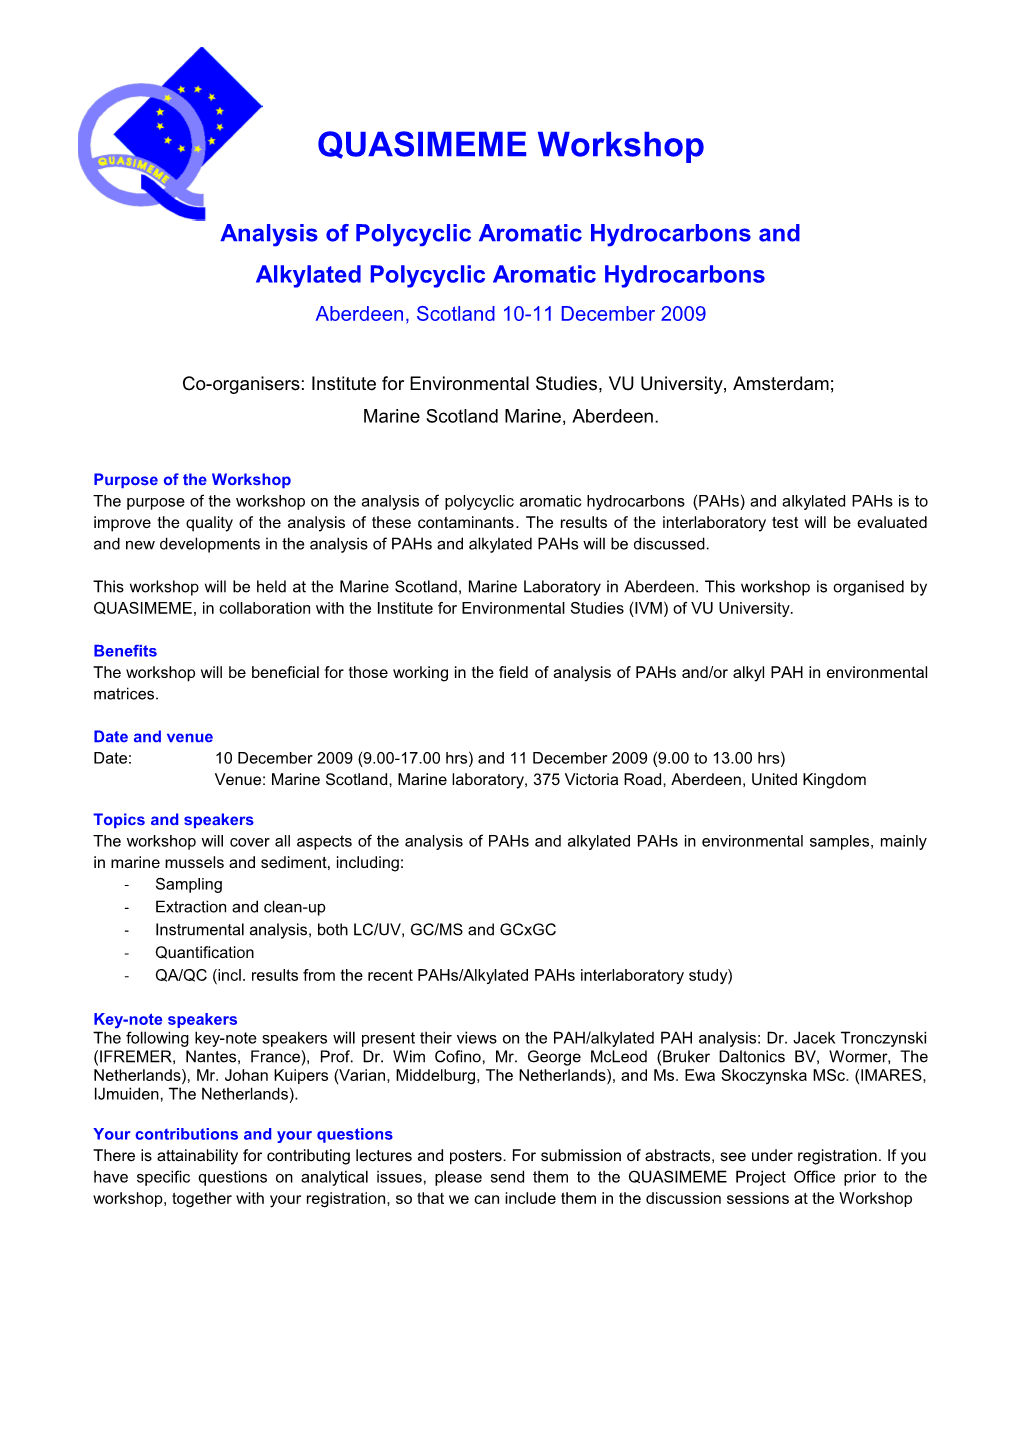 Analysis of Polycyclic Aromatic Hydrocarbons And